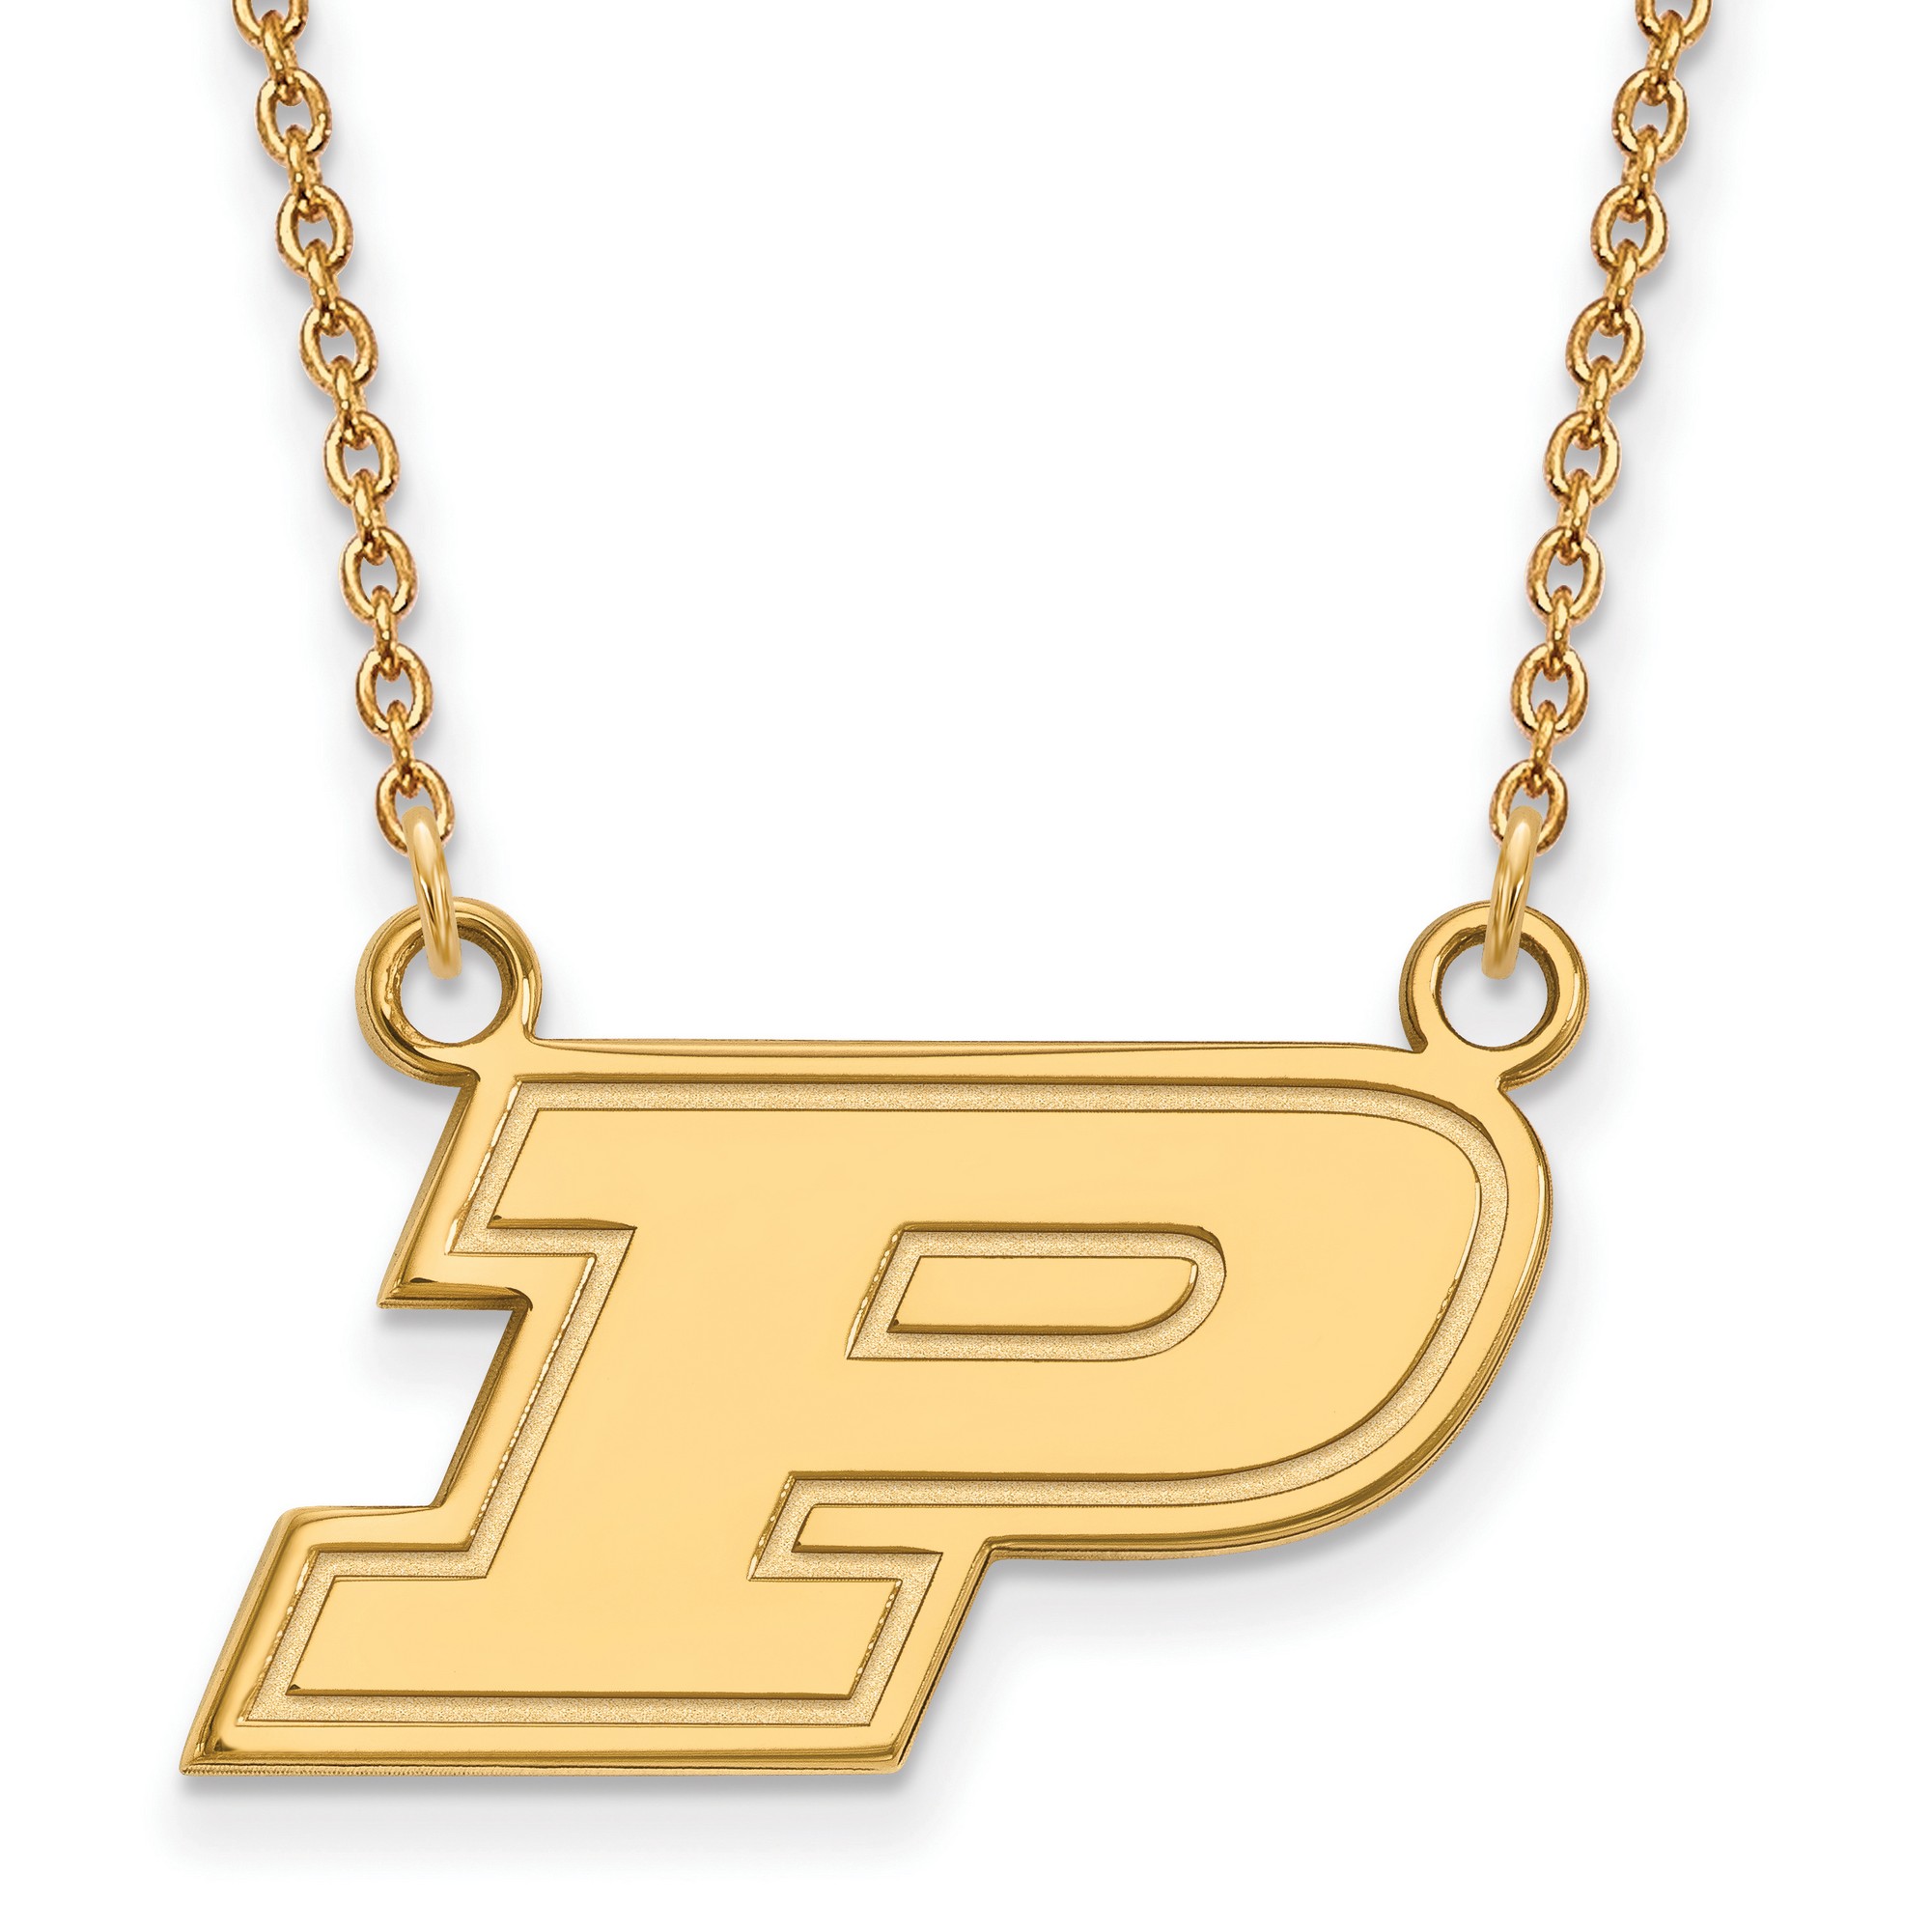 Purdue Boilermakers Motion P Logo Charm Pendant Necklace Gold Plated